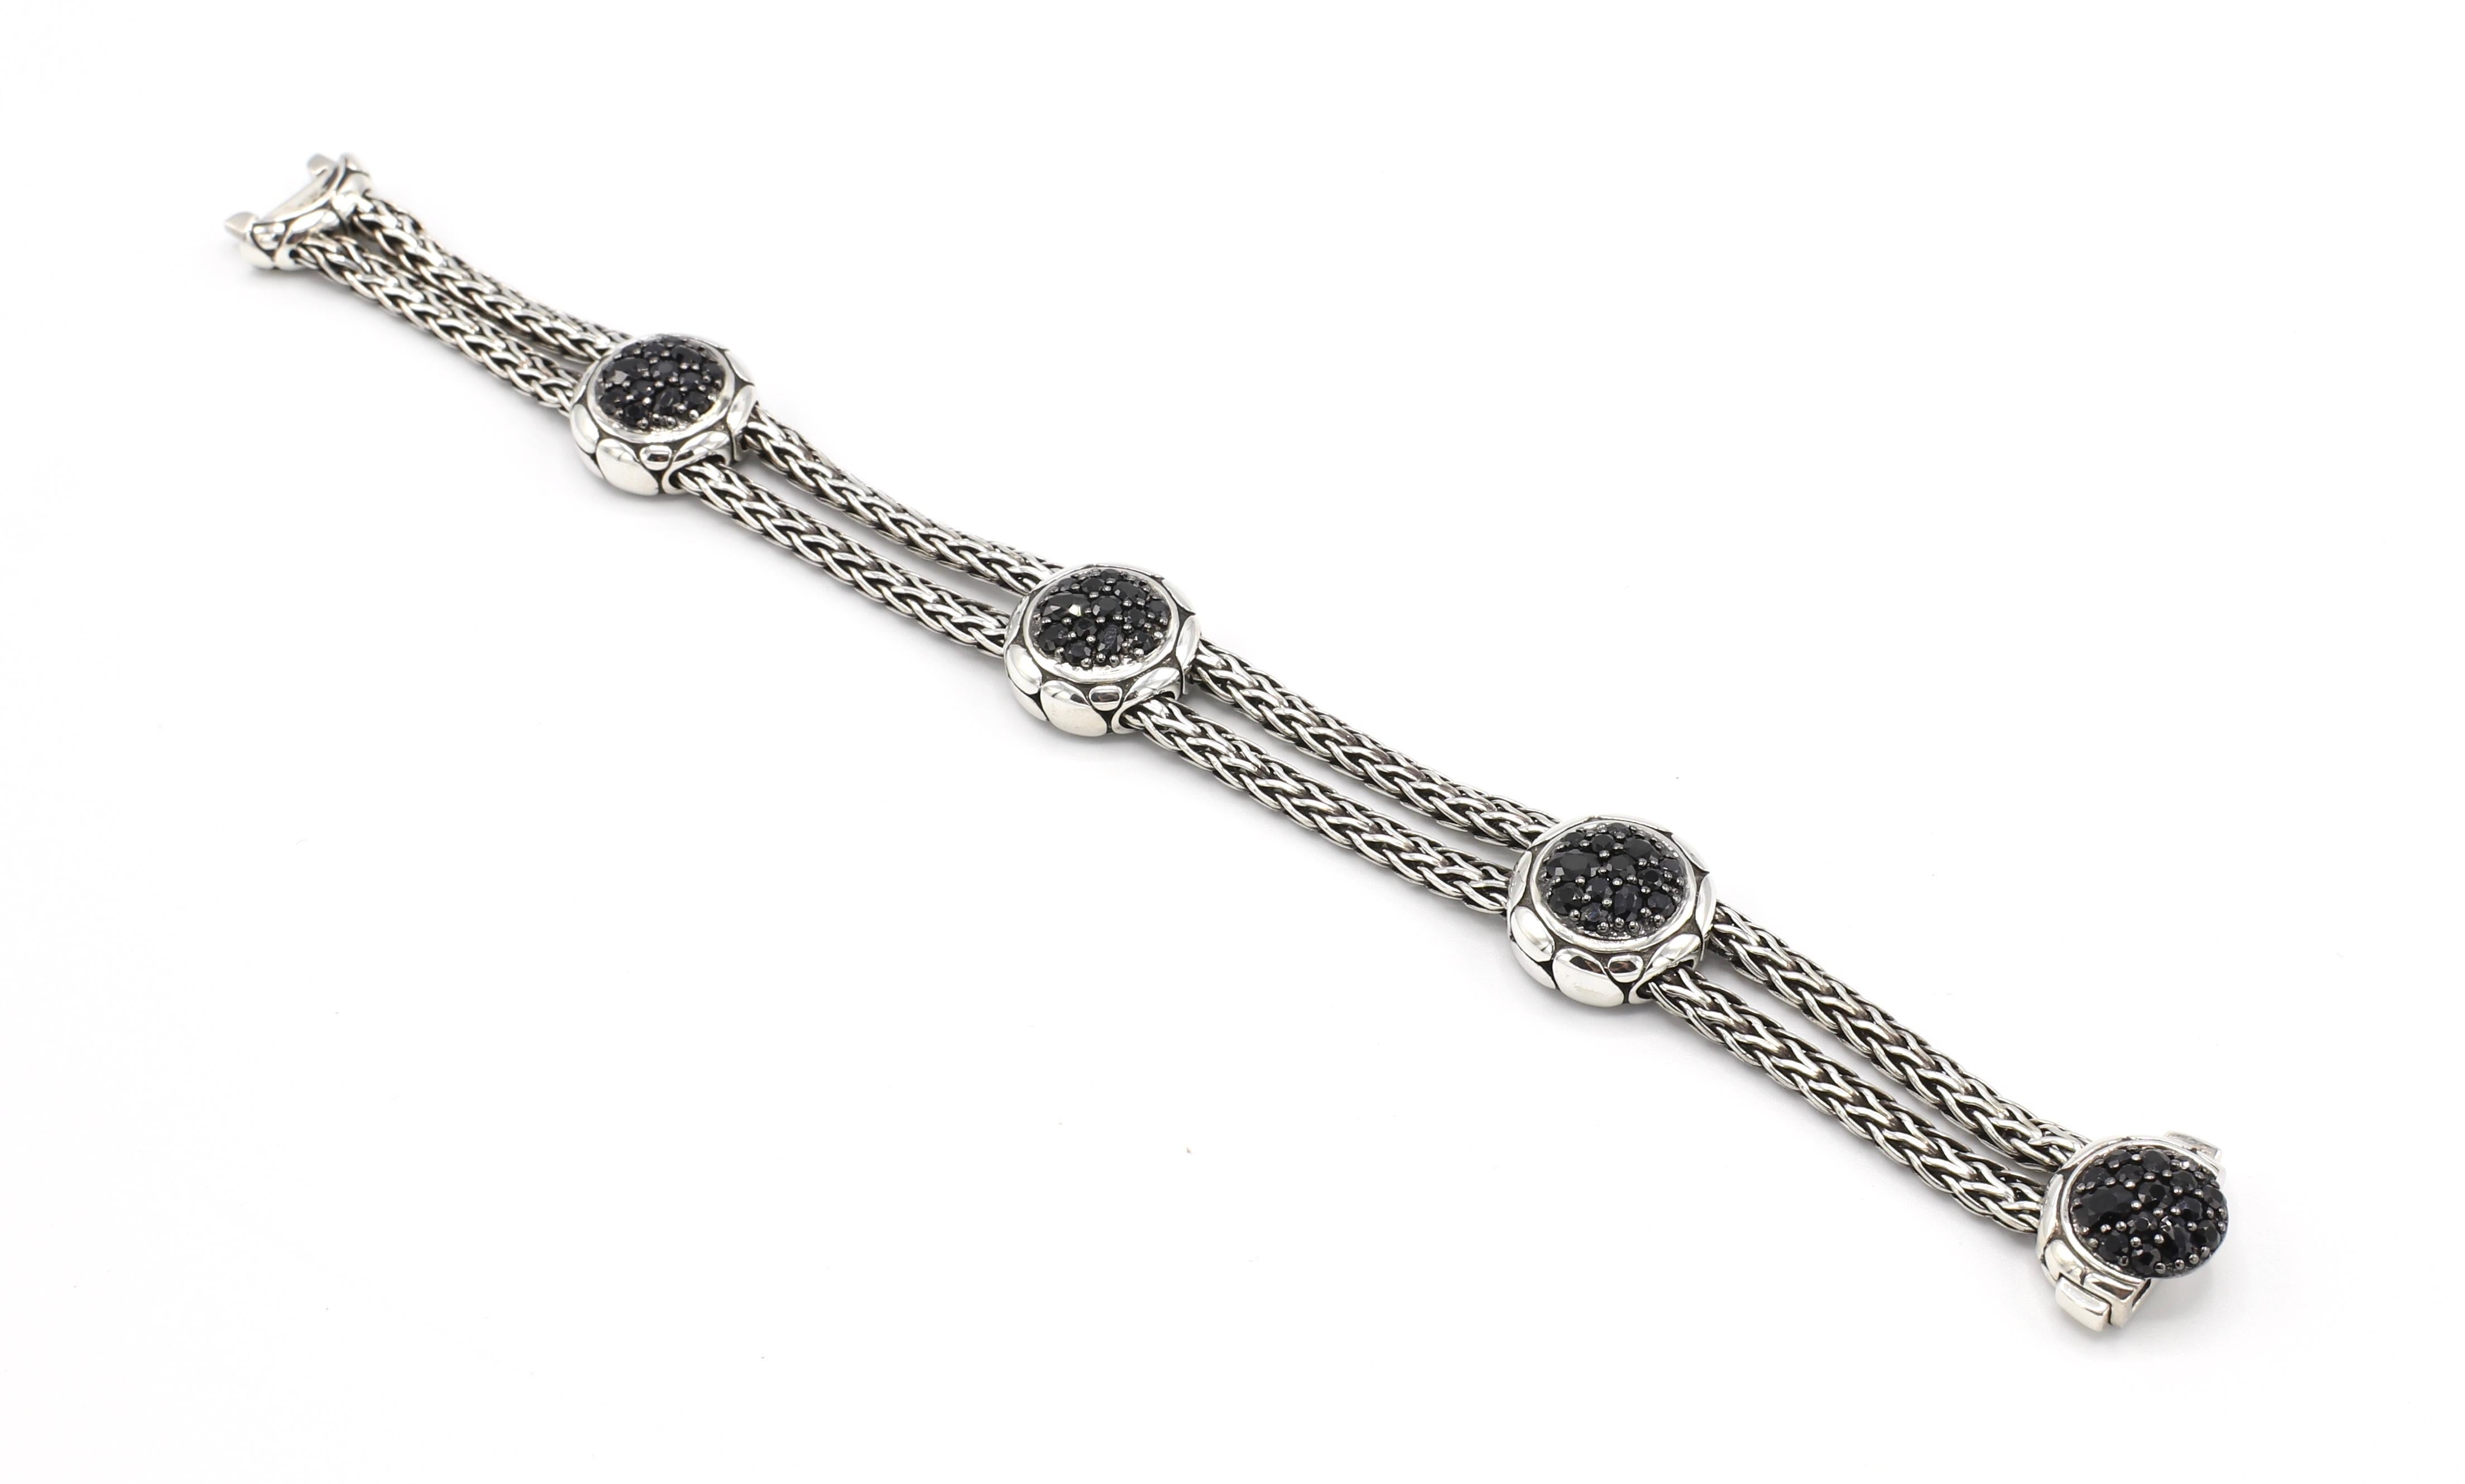 John Hardy Kali Sterling Silver Pure Lava Fire Four Station Bracelet with Black Sapphire

Metal: Sterling Silver
Weight: 30.7 grams 
Gemstone: Black sapphires 
Length: 7.25 inches
Width: 15mm 
Clasp: Push clasp
Signed: 925 with JH hallmark
Retail: